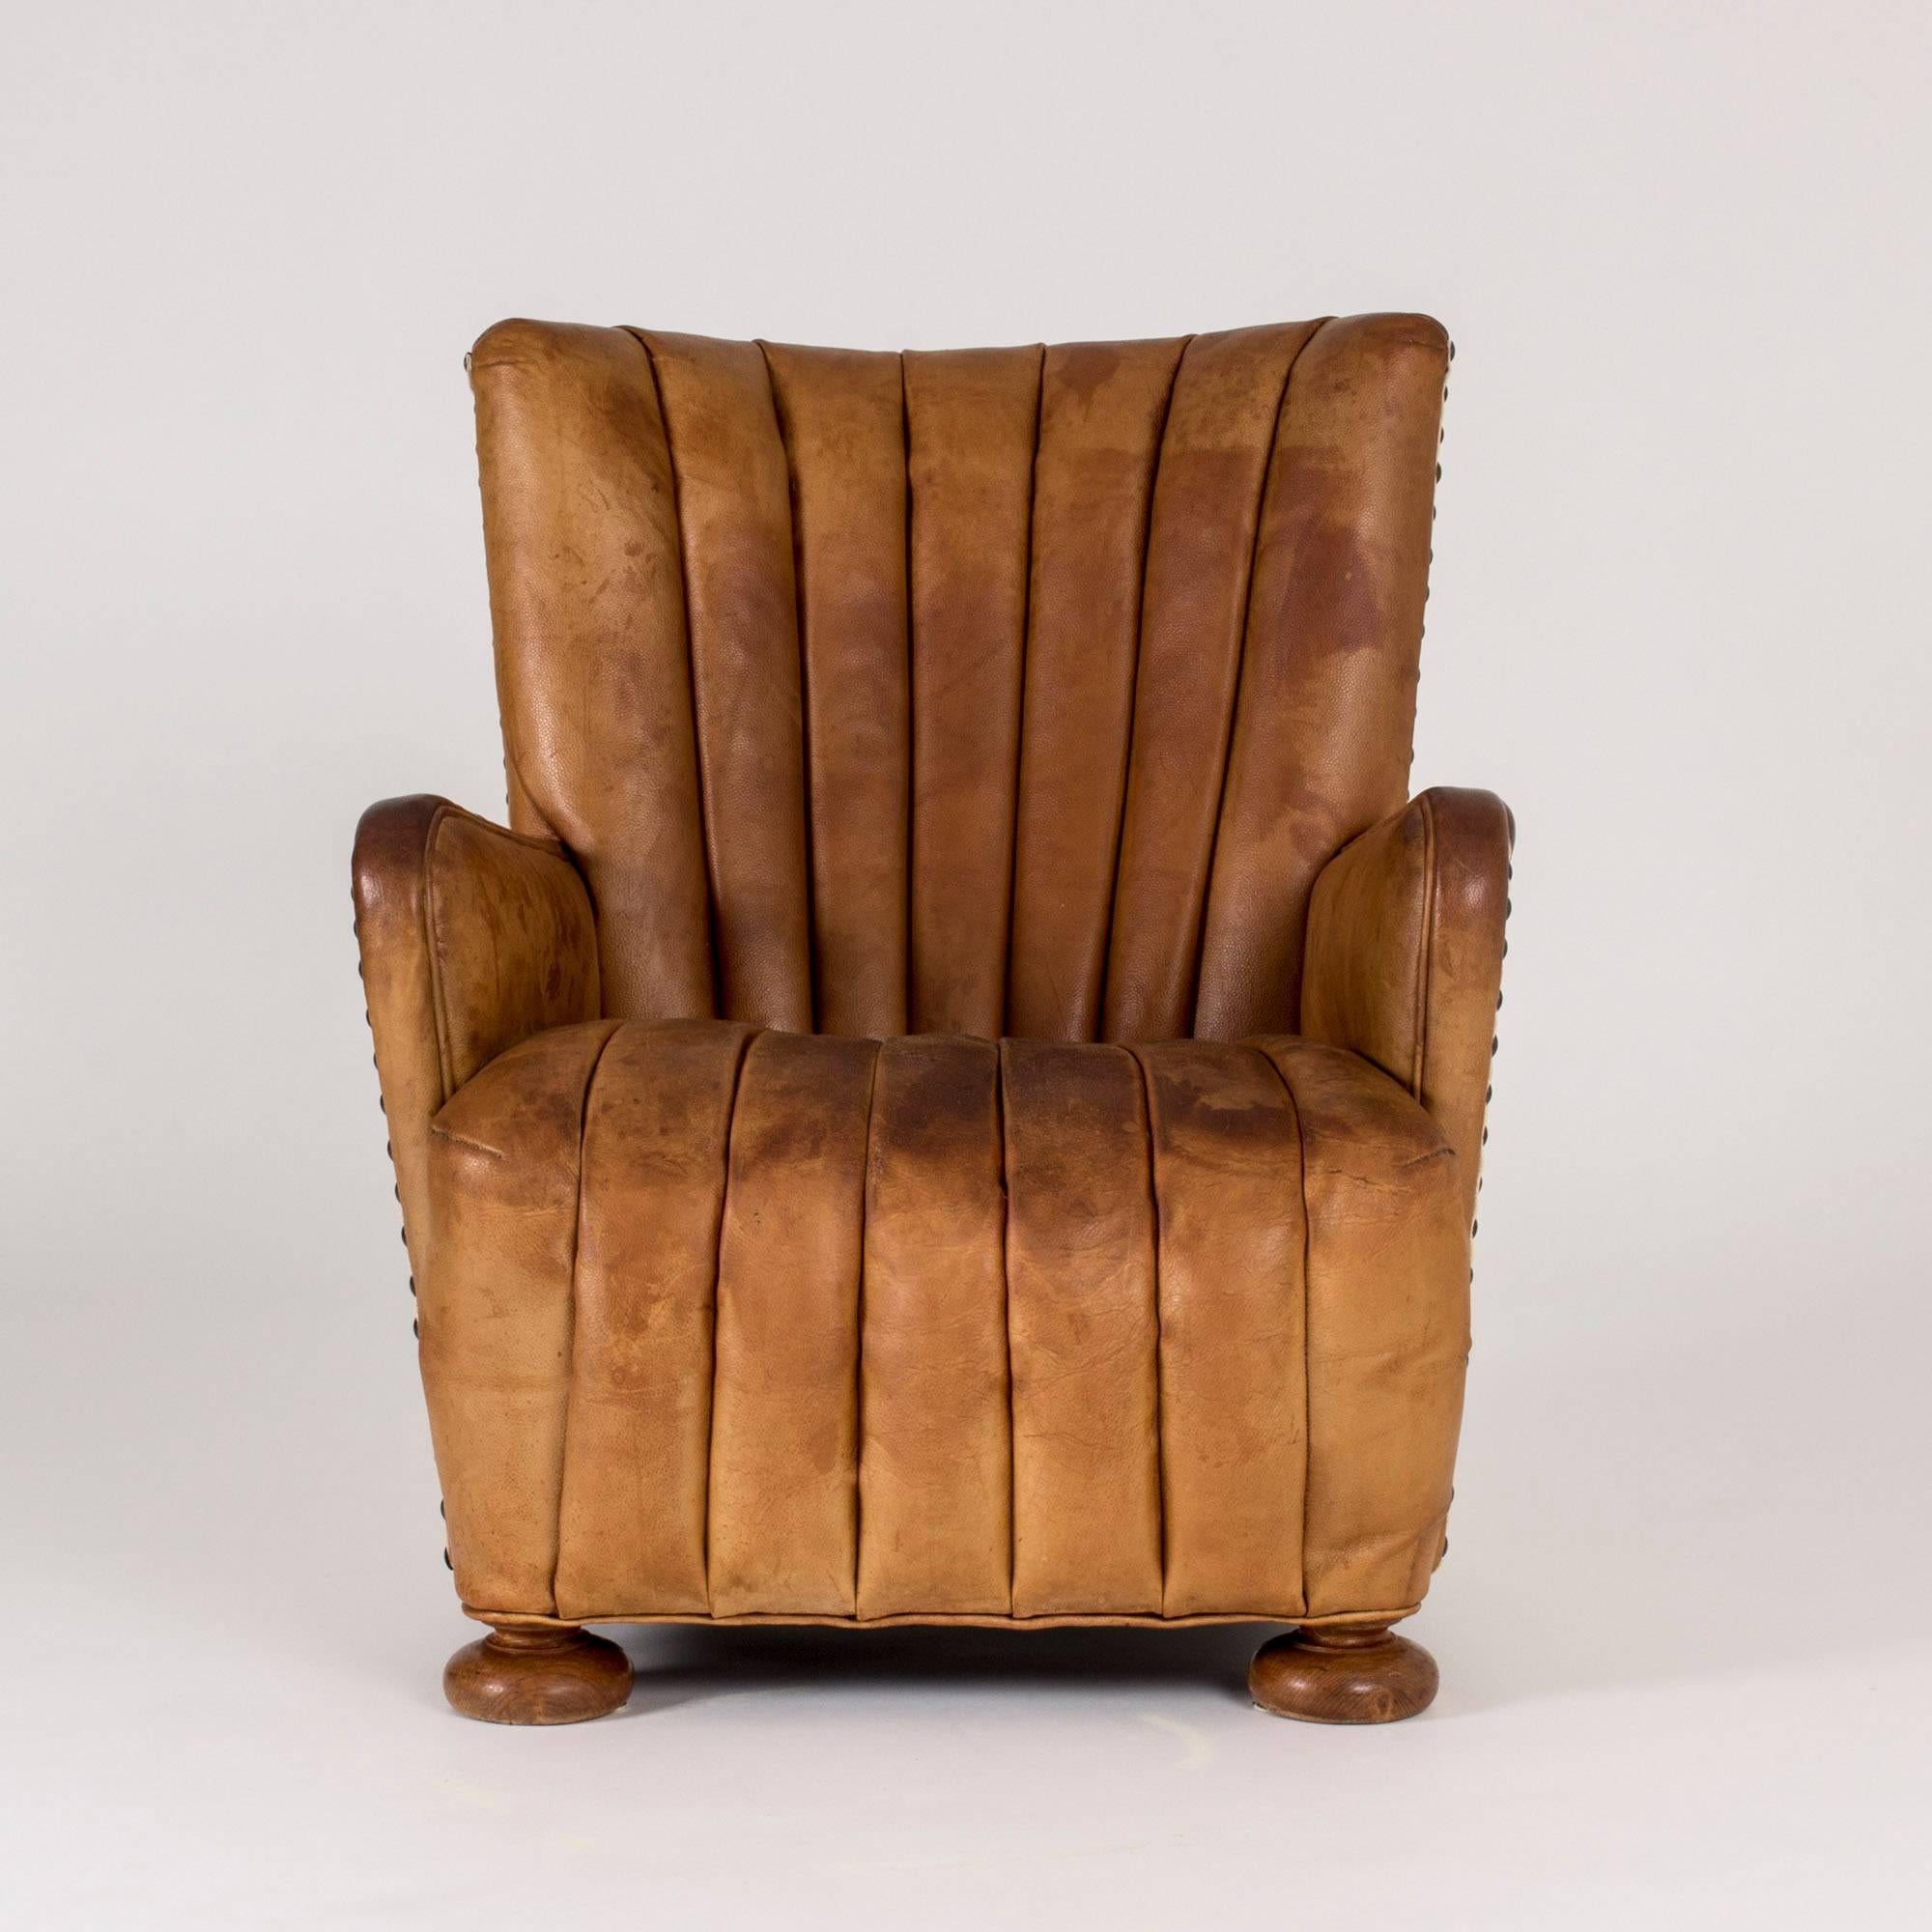 Imposing Danish 1930s lounge chair with just the right amount of slouch. Upholstered with leather in the front and with cream-colored linen in the back, adorned along the edges with brass decorative nails. High quality leather in good condition and